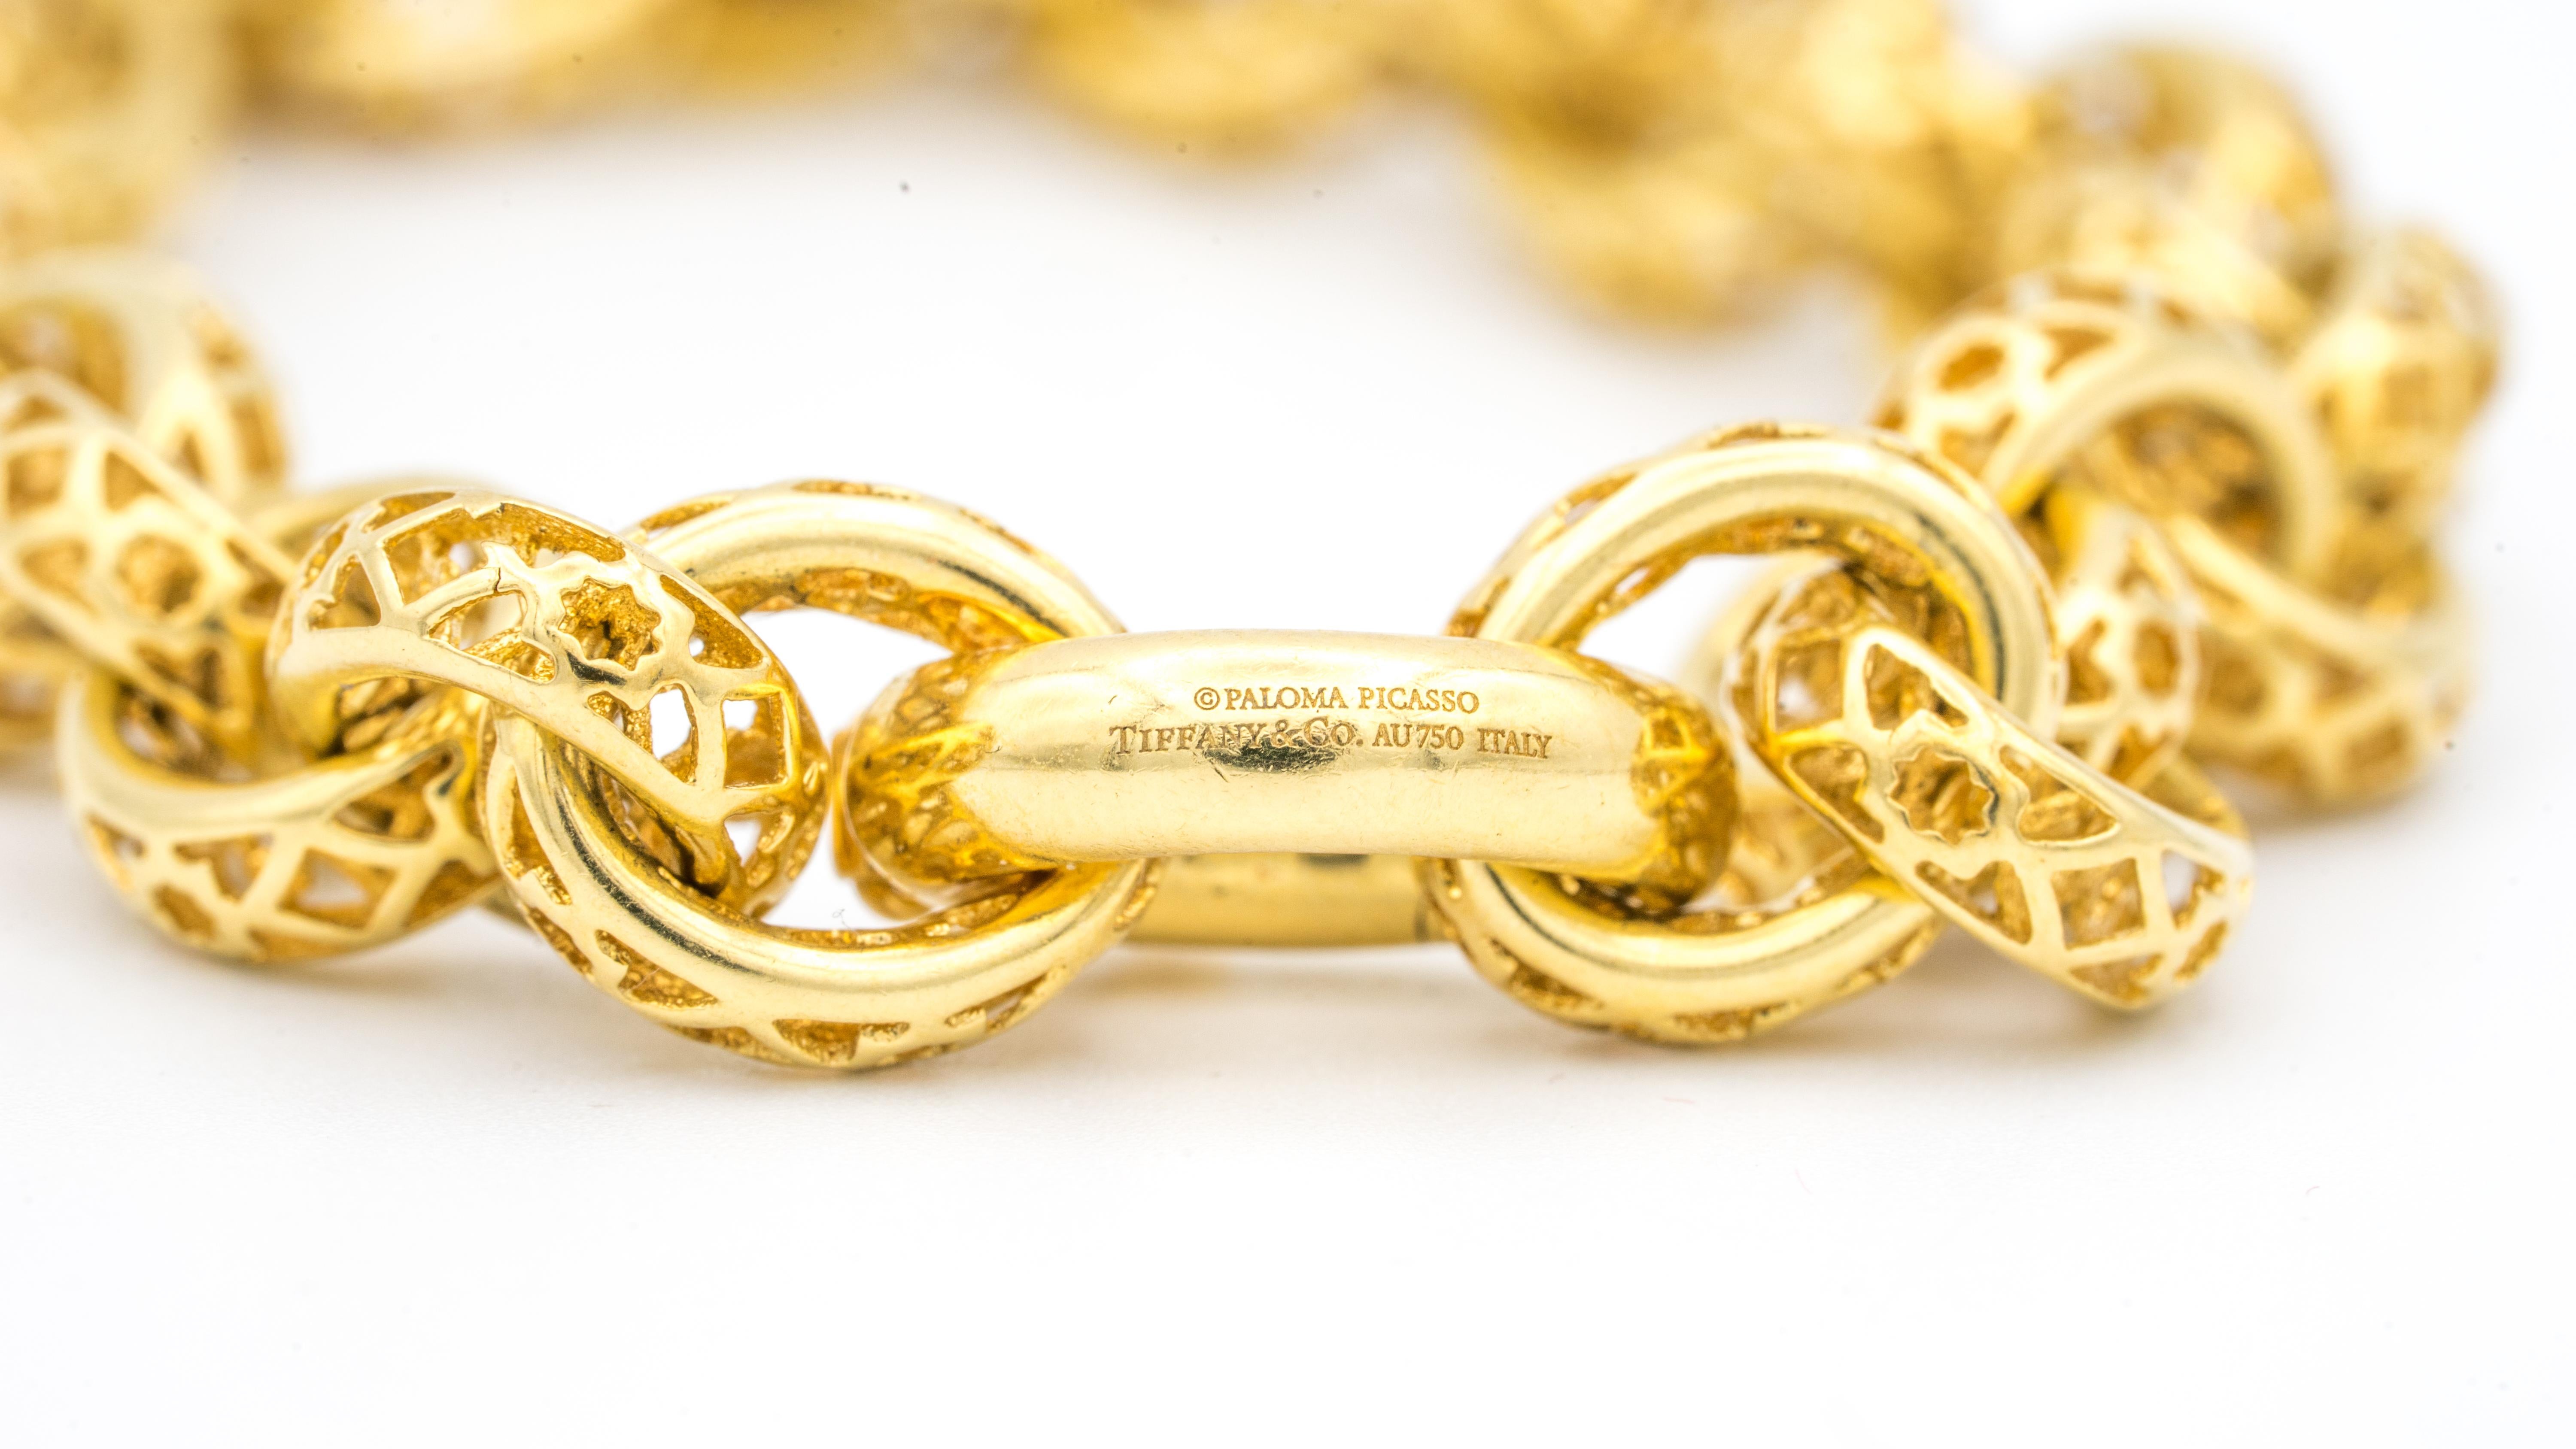 Contemporary Paloma Picasso Marrakesh Bracelet for Tiffany & Co in 18 Karat Yellow Gold